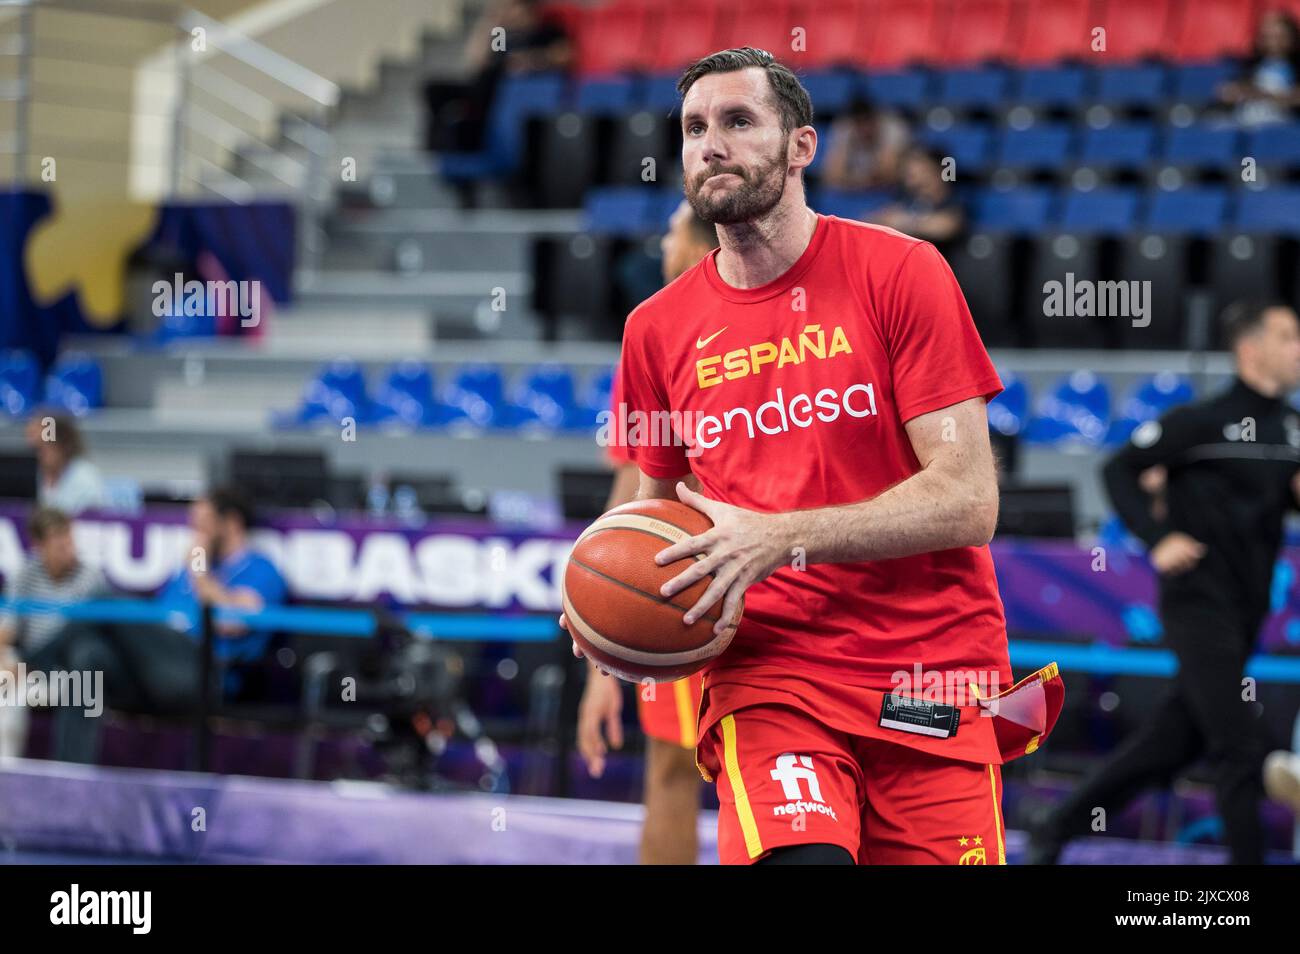 Tbilisi, Georgia, 6th September 2022. Rodolfo Fernandez of Spain warms up during the FIBA EuroBasket 2022 group A match between Montenegro and Spain at Tbilisi Arena in Tbilisi, Georgia. September 6, 2022. Credit: Nikola Krstic/Alamy Stock Photo